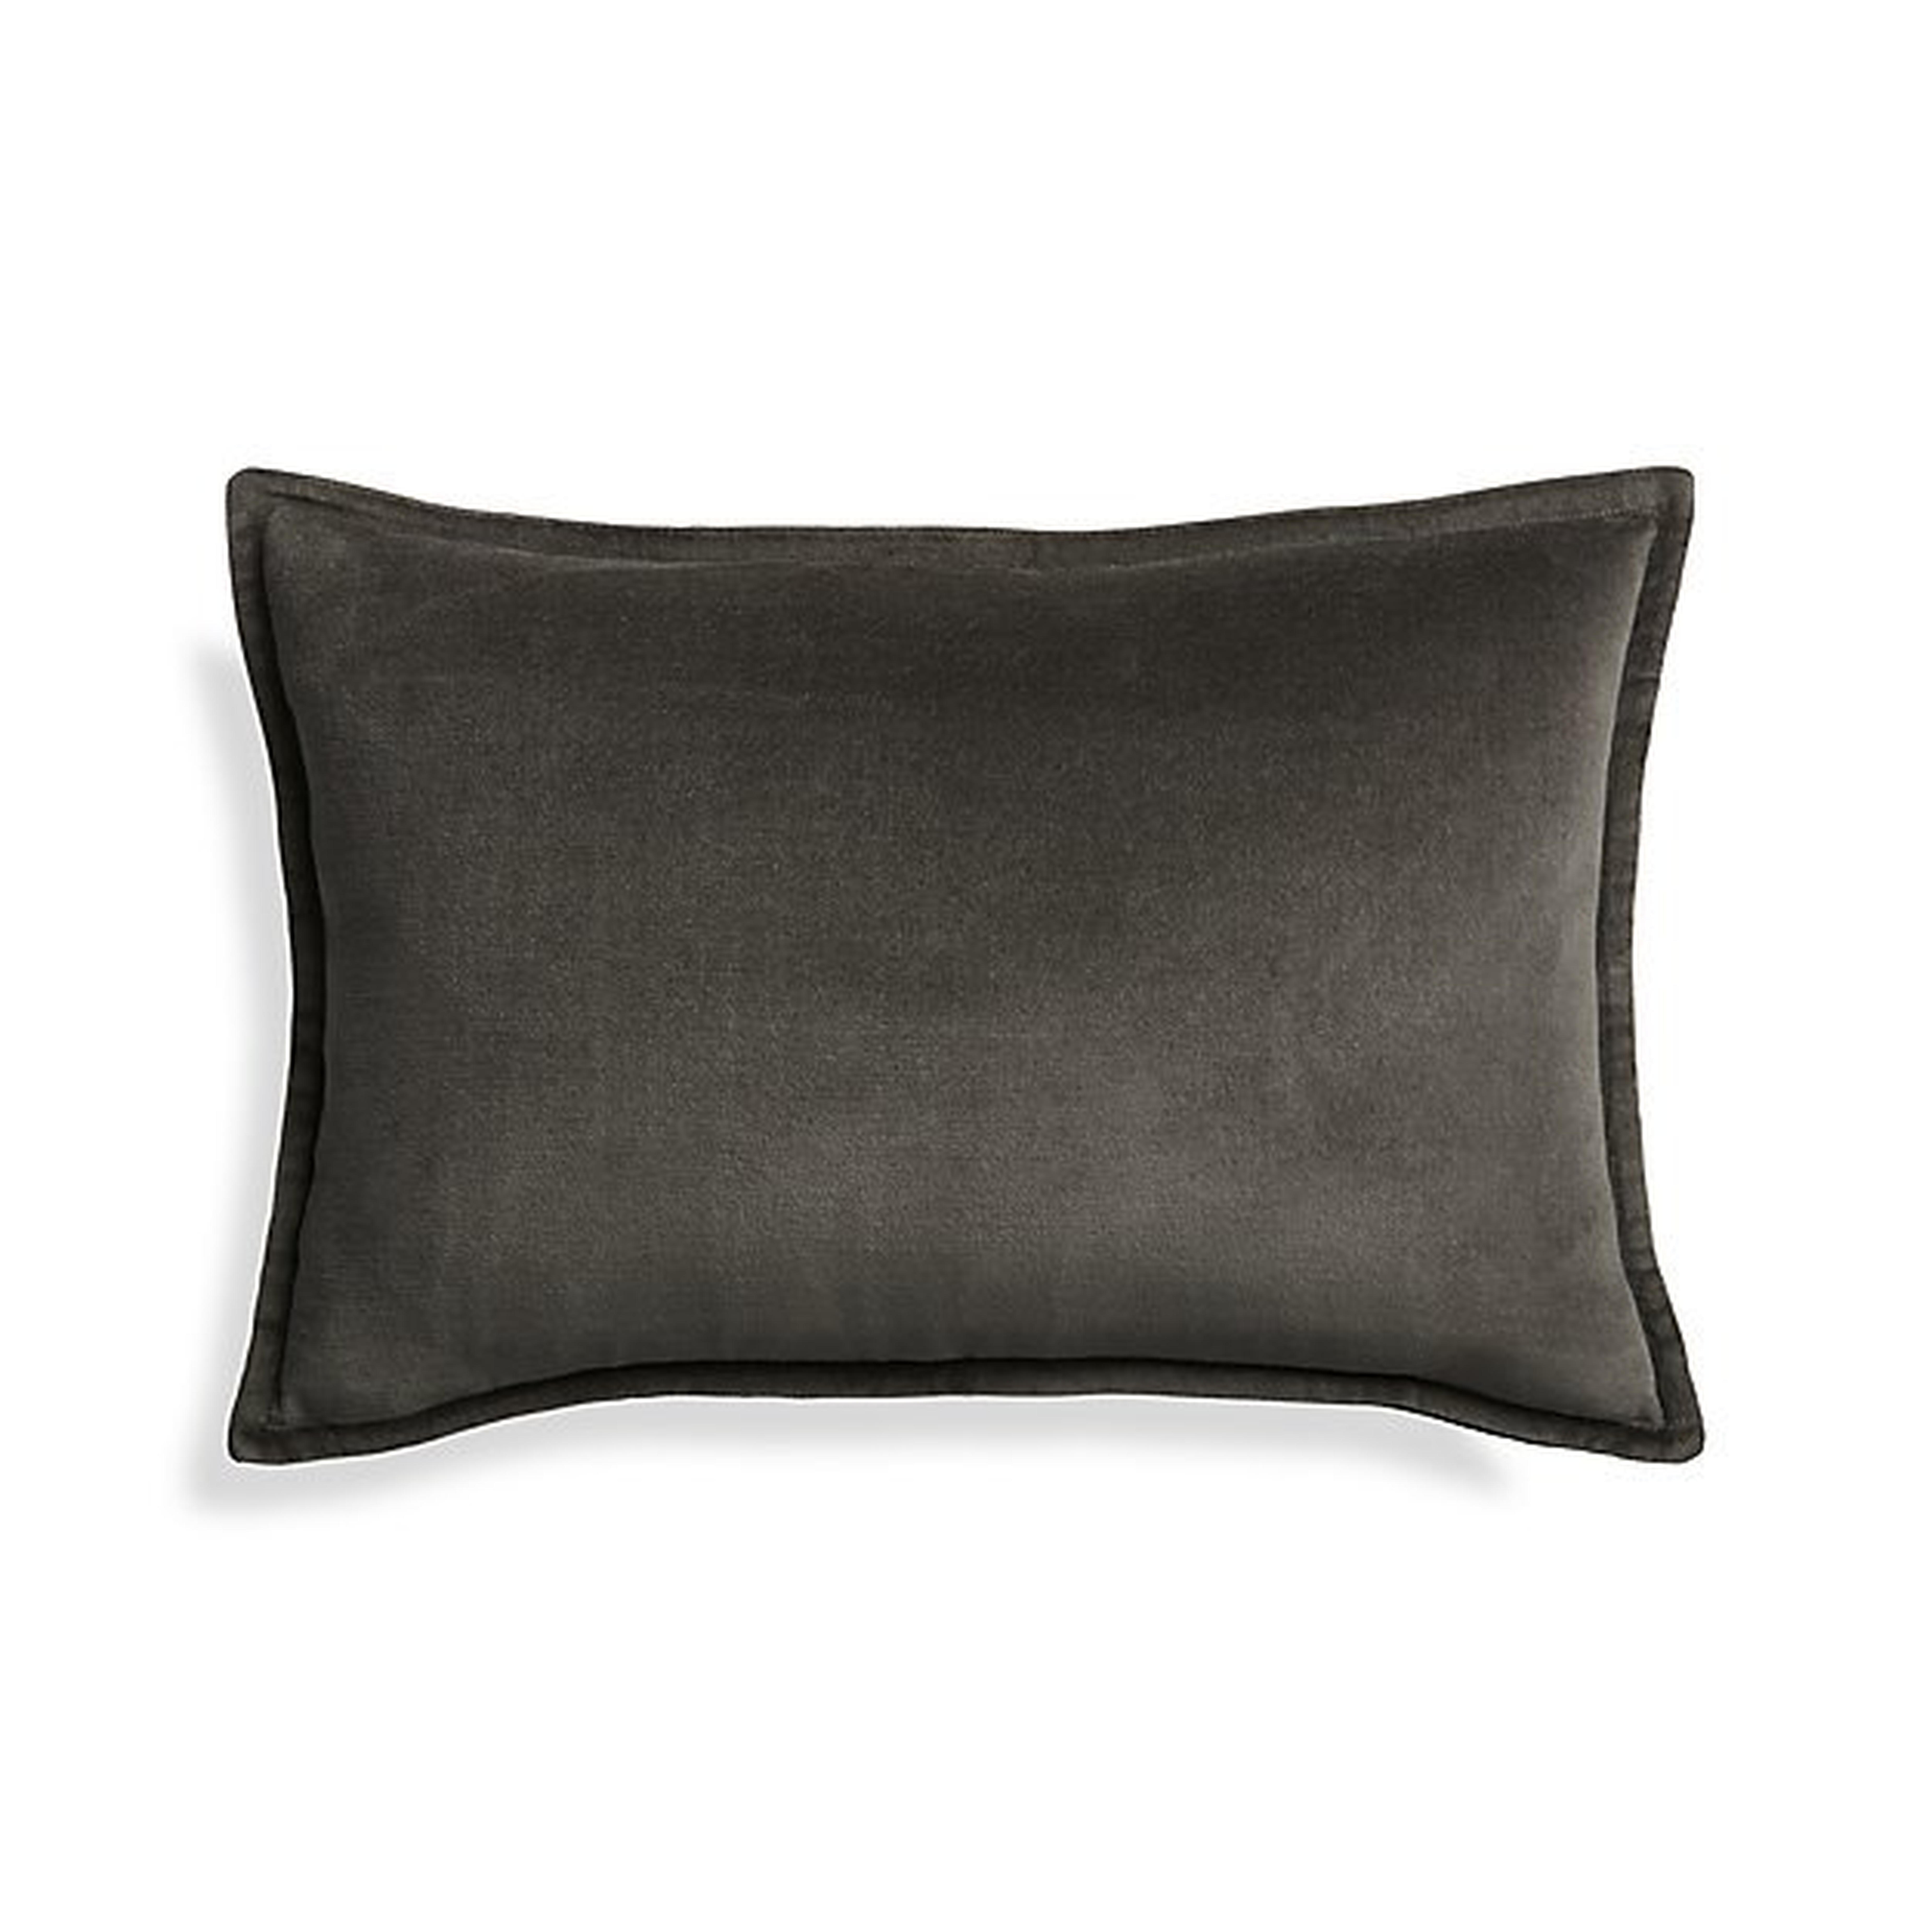 Brenner Grey 18"x12" Pillow - Crate and Barrel